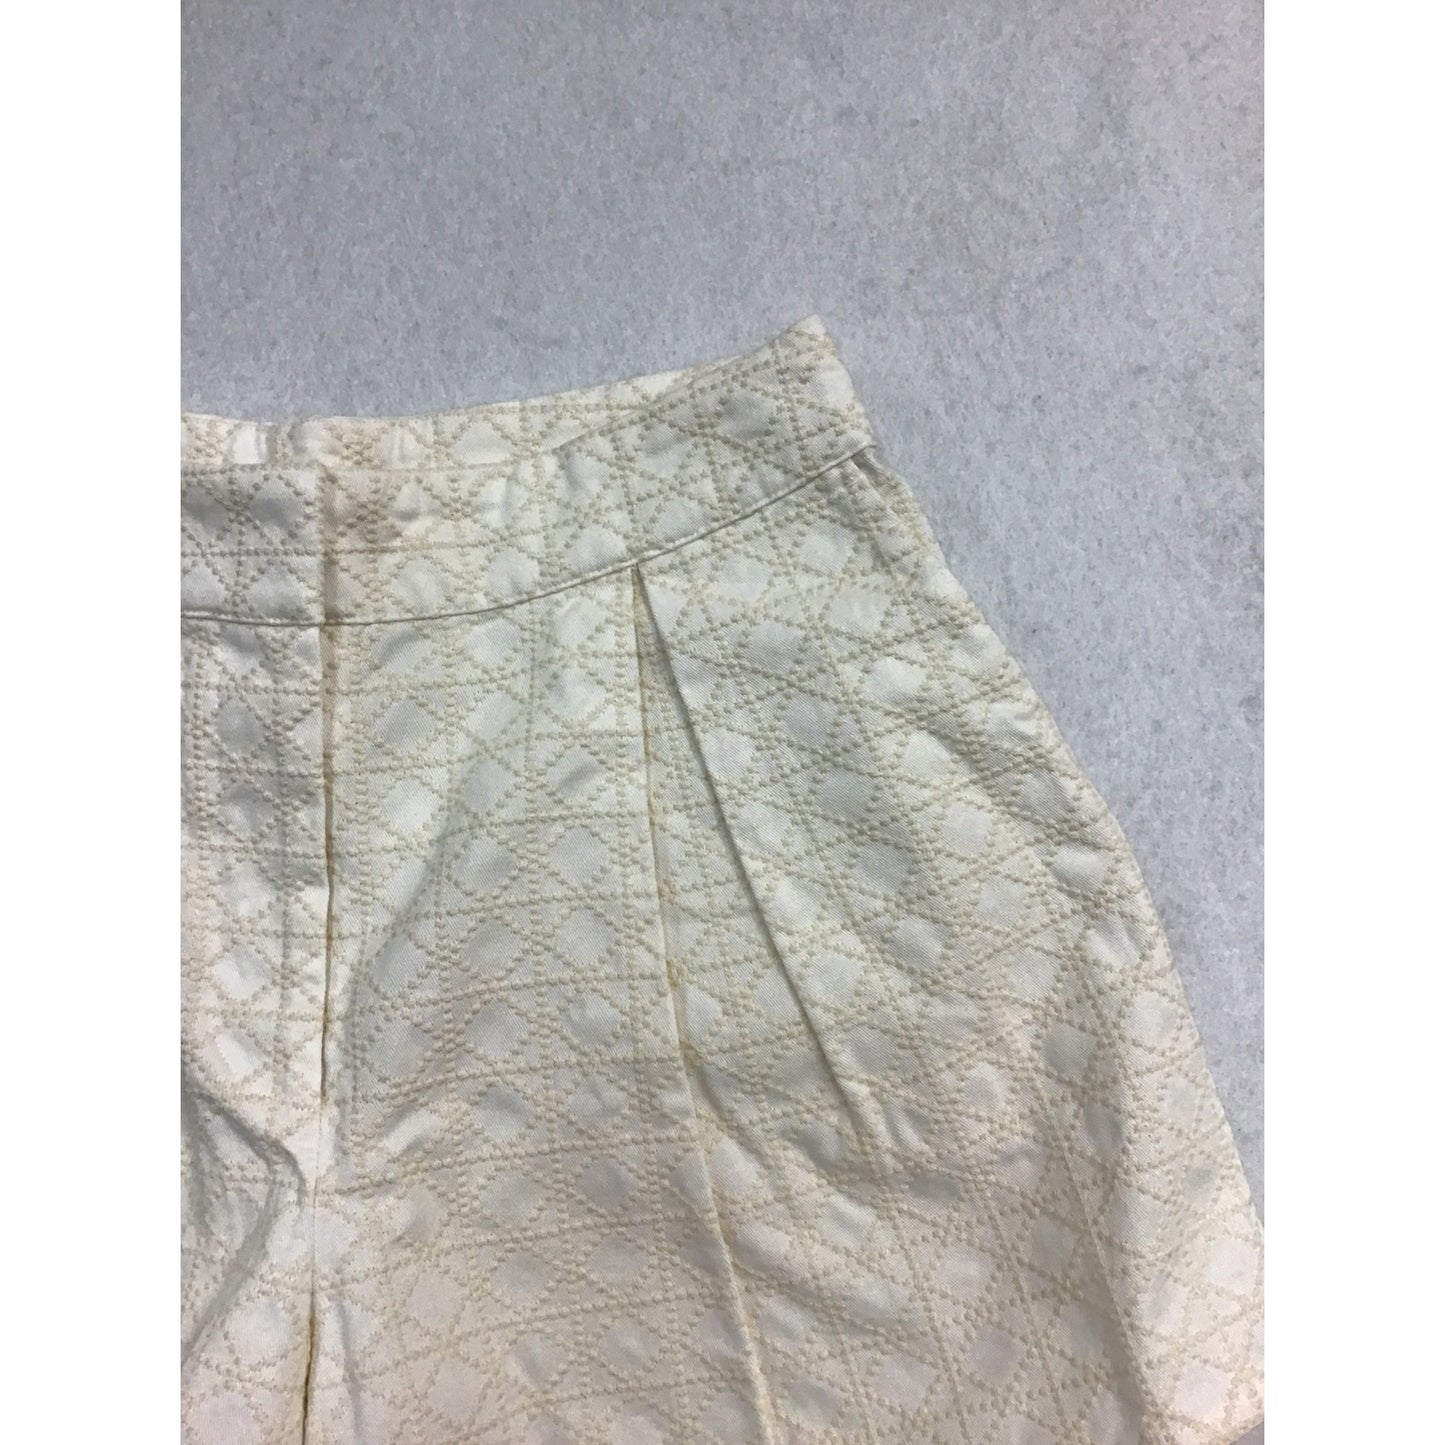 Women’s Classy Embroidered Shorts